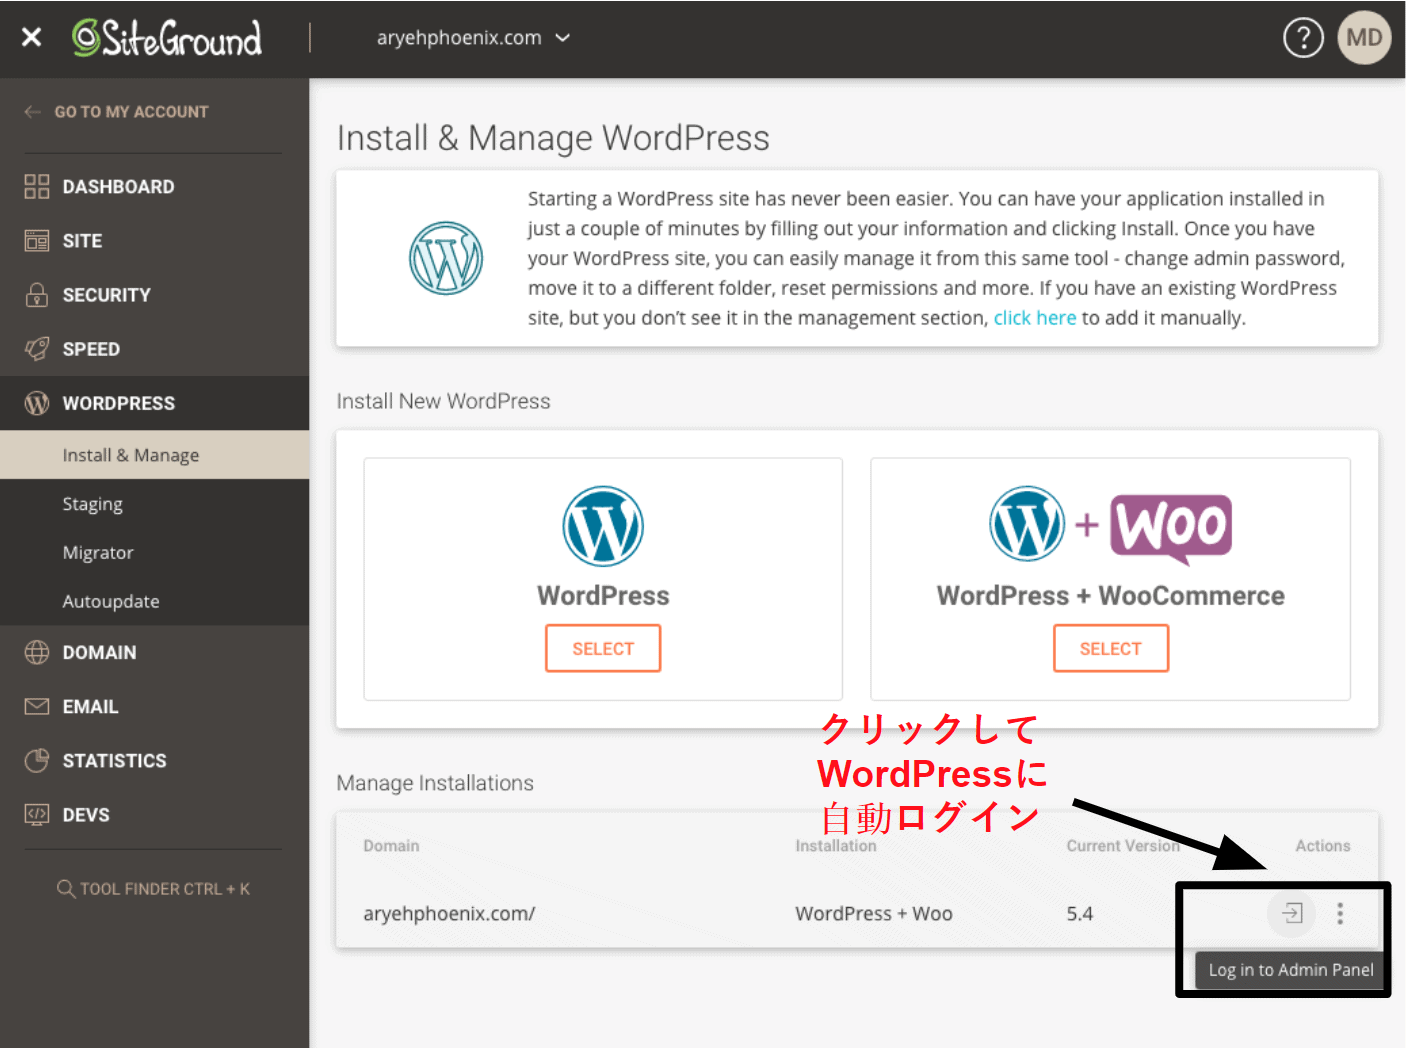 SiteGround offers a one click login option for your WordPress dashboard JA15 1